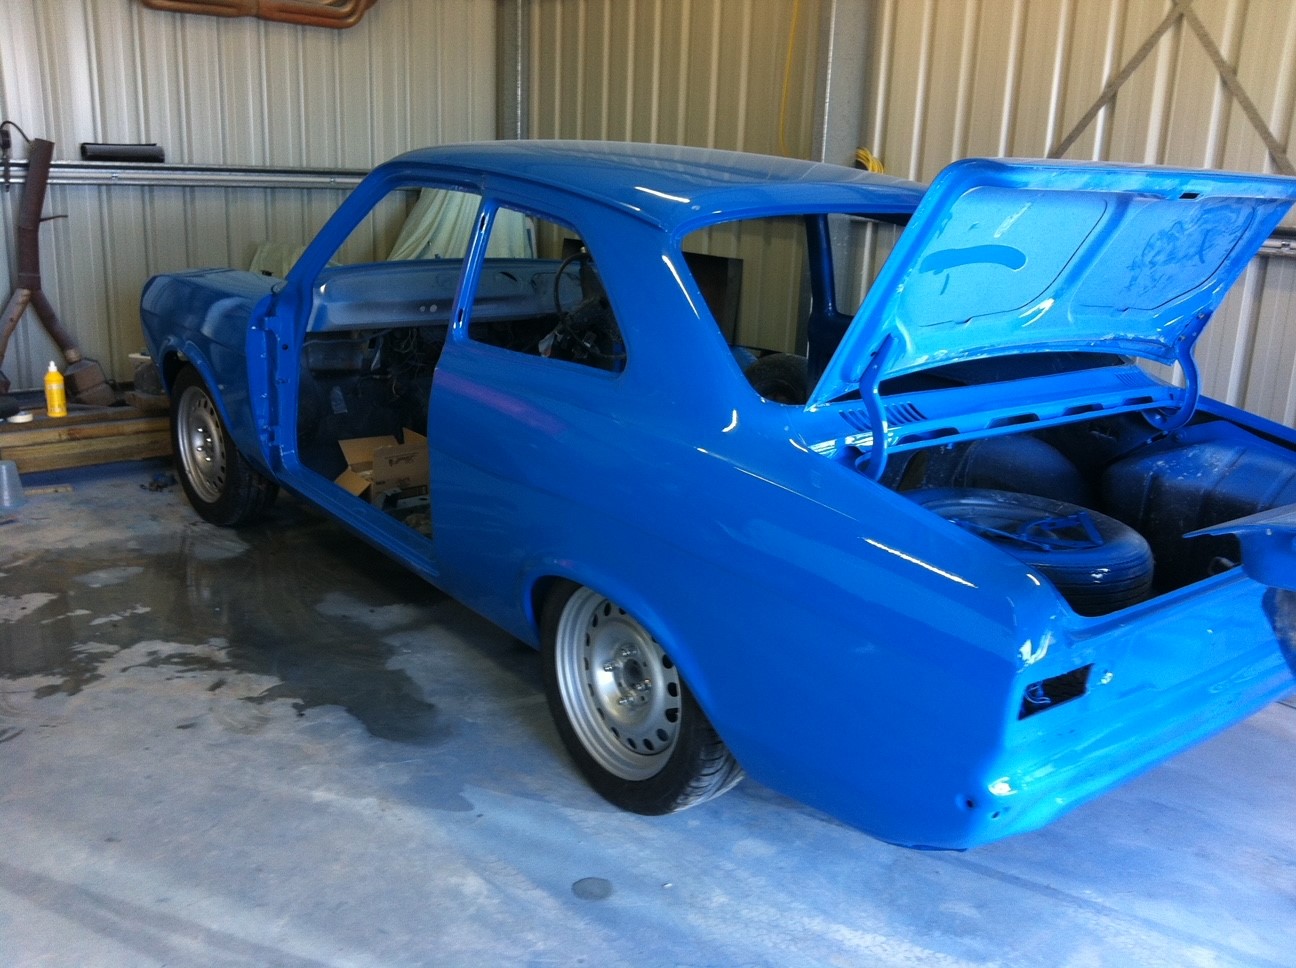 Laid up blue 1975 Ford Mk 1 Escort Coupe facing left and backwards